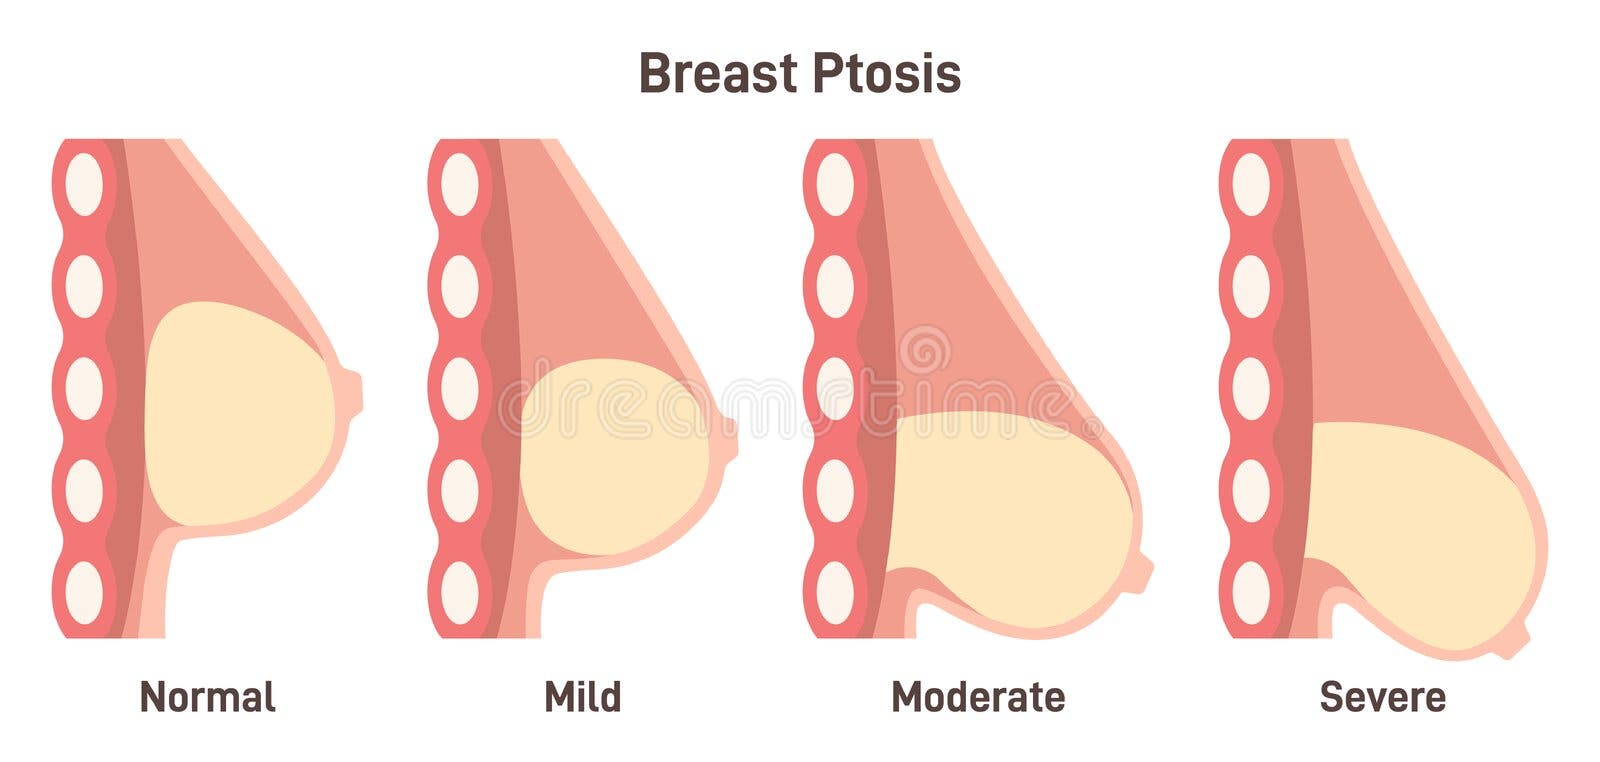 Breast shape (ptosis) as a marker of a woman's breast